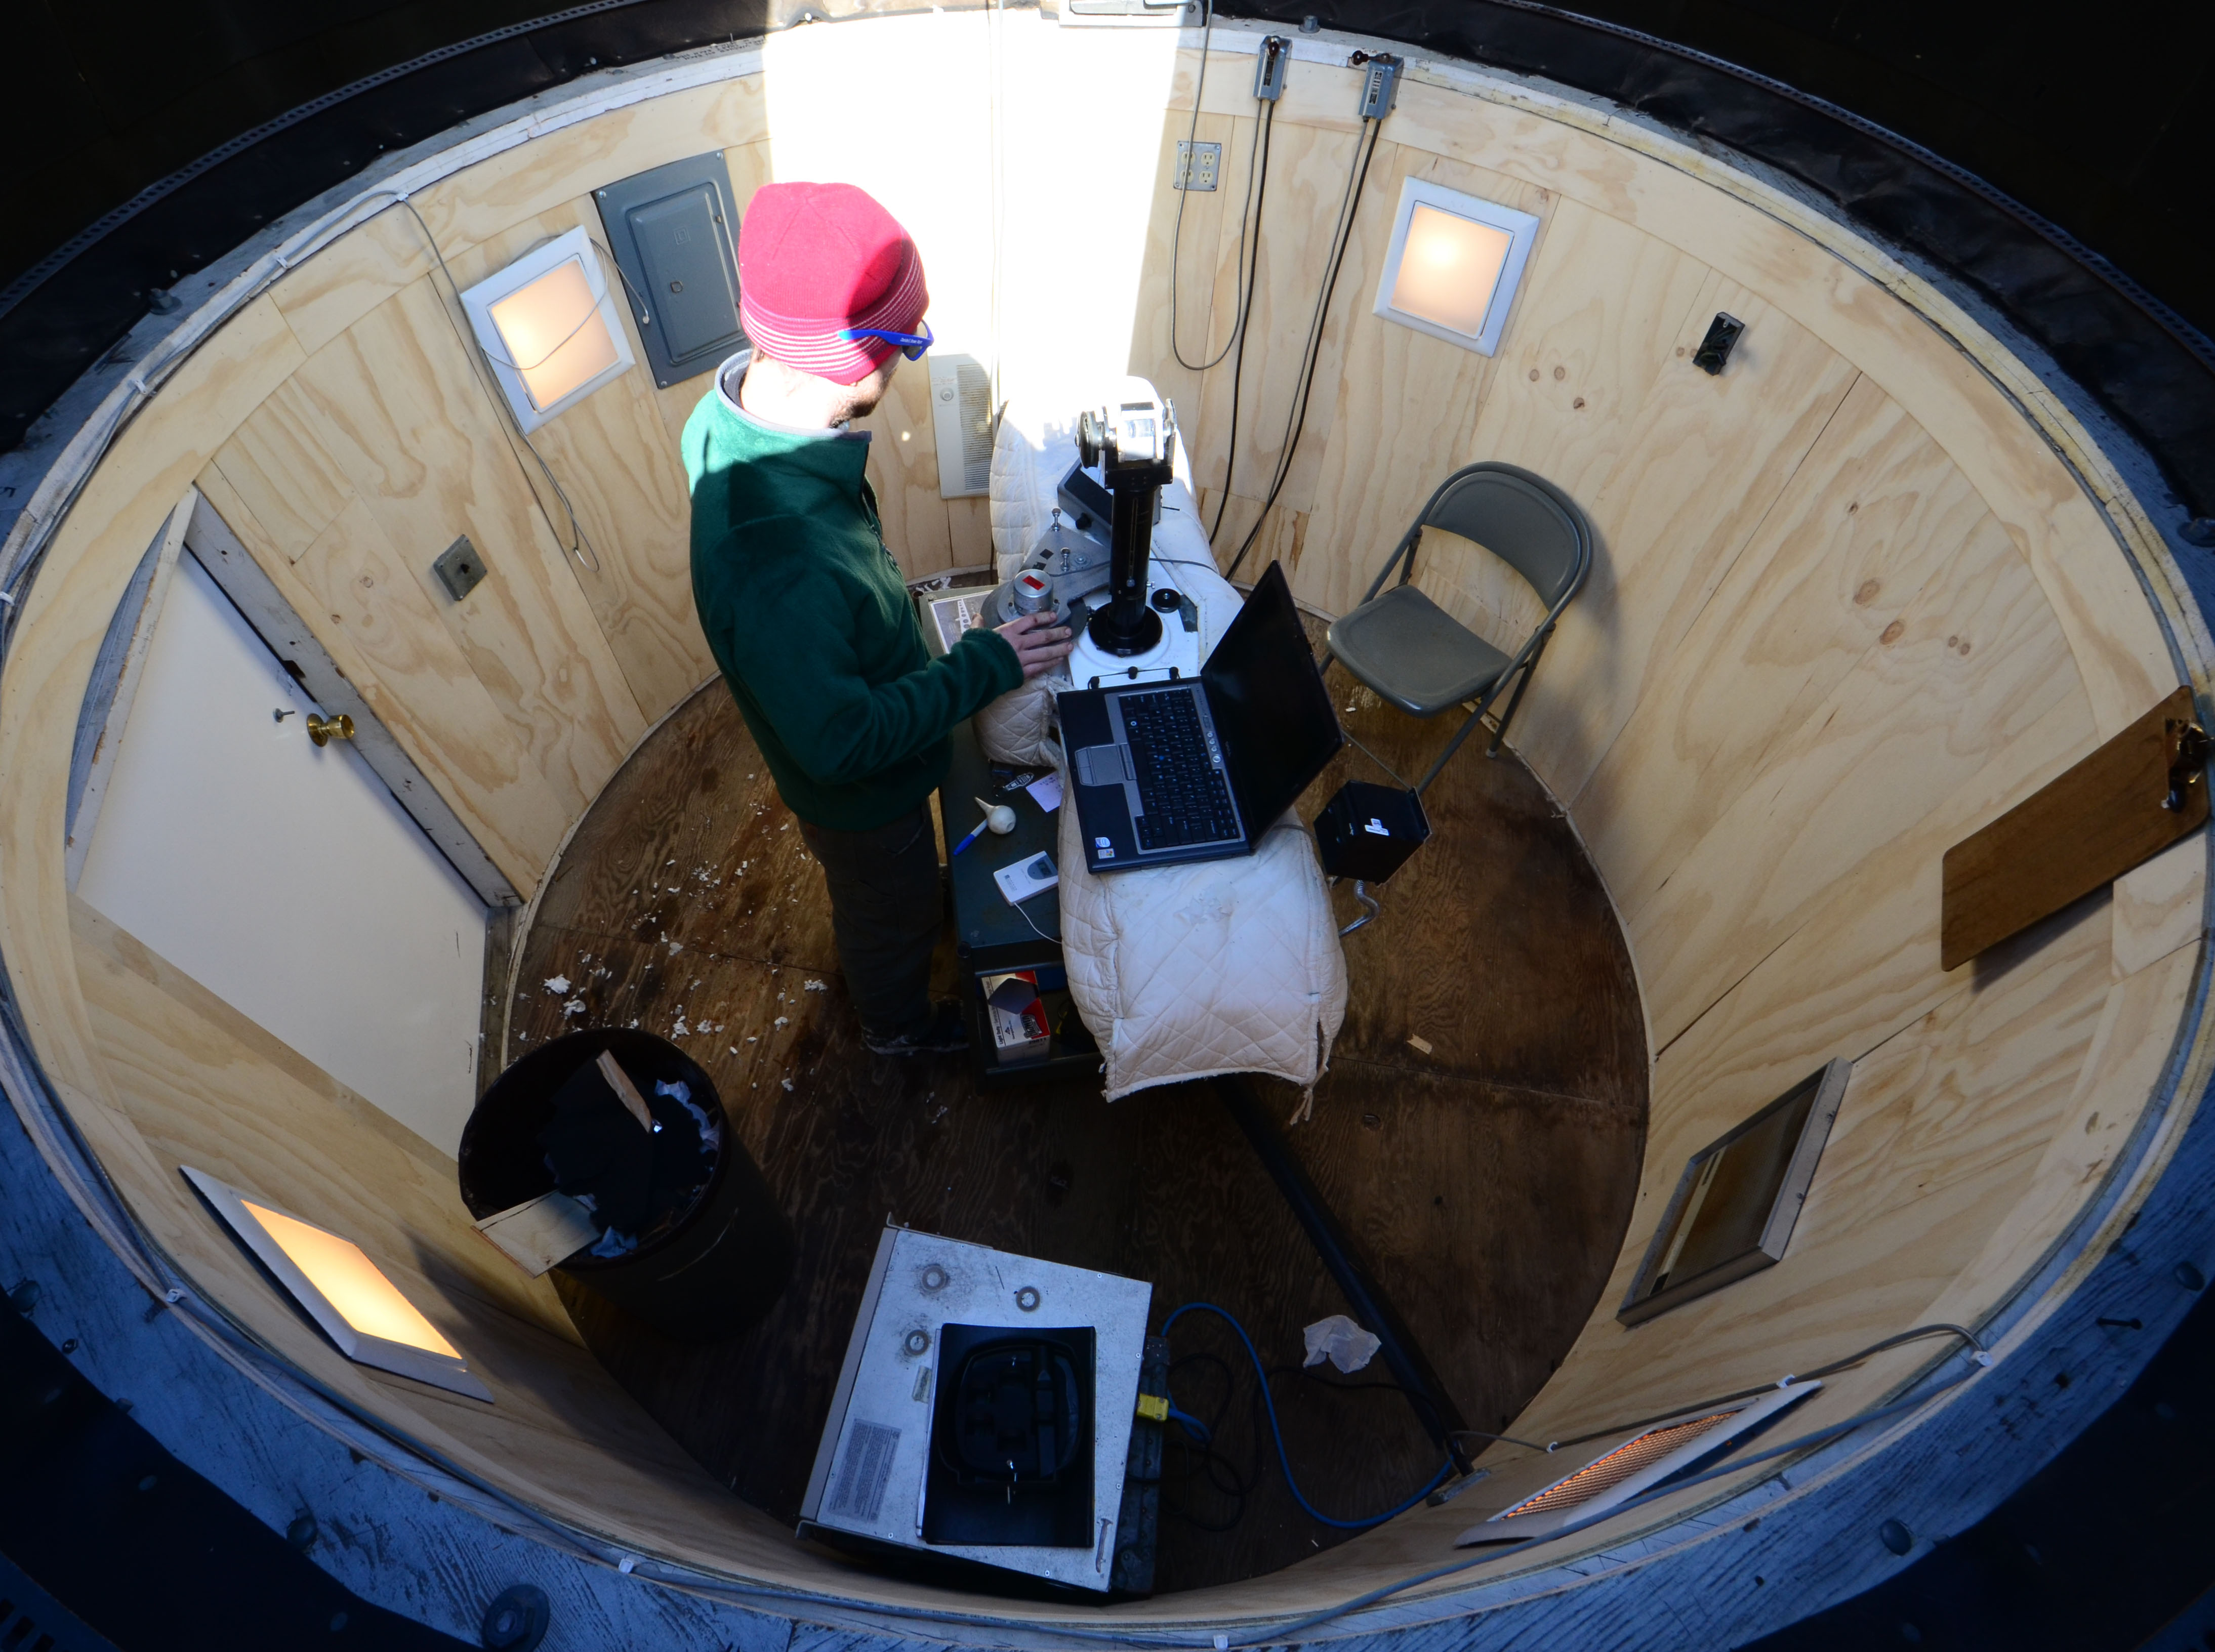 In the Dobson Dome, NOAA technician Marty Martinsen observes the amount of ozone in the atmosphere. Sunlight is required for the spectrophotometer to measure ozone.